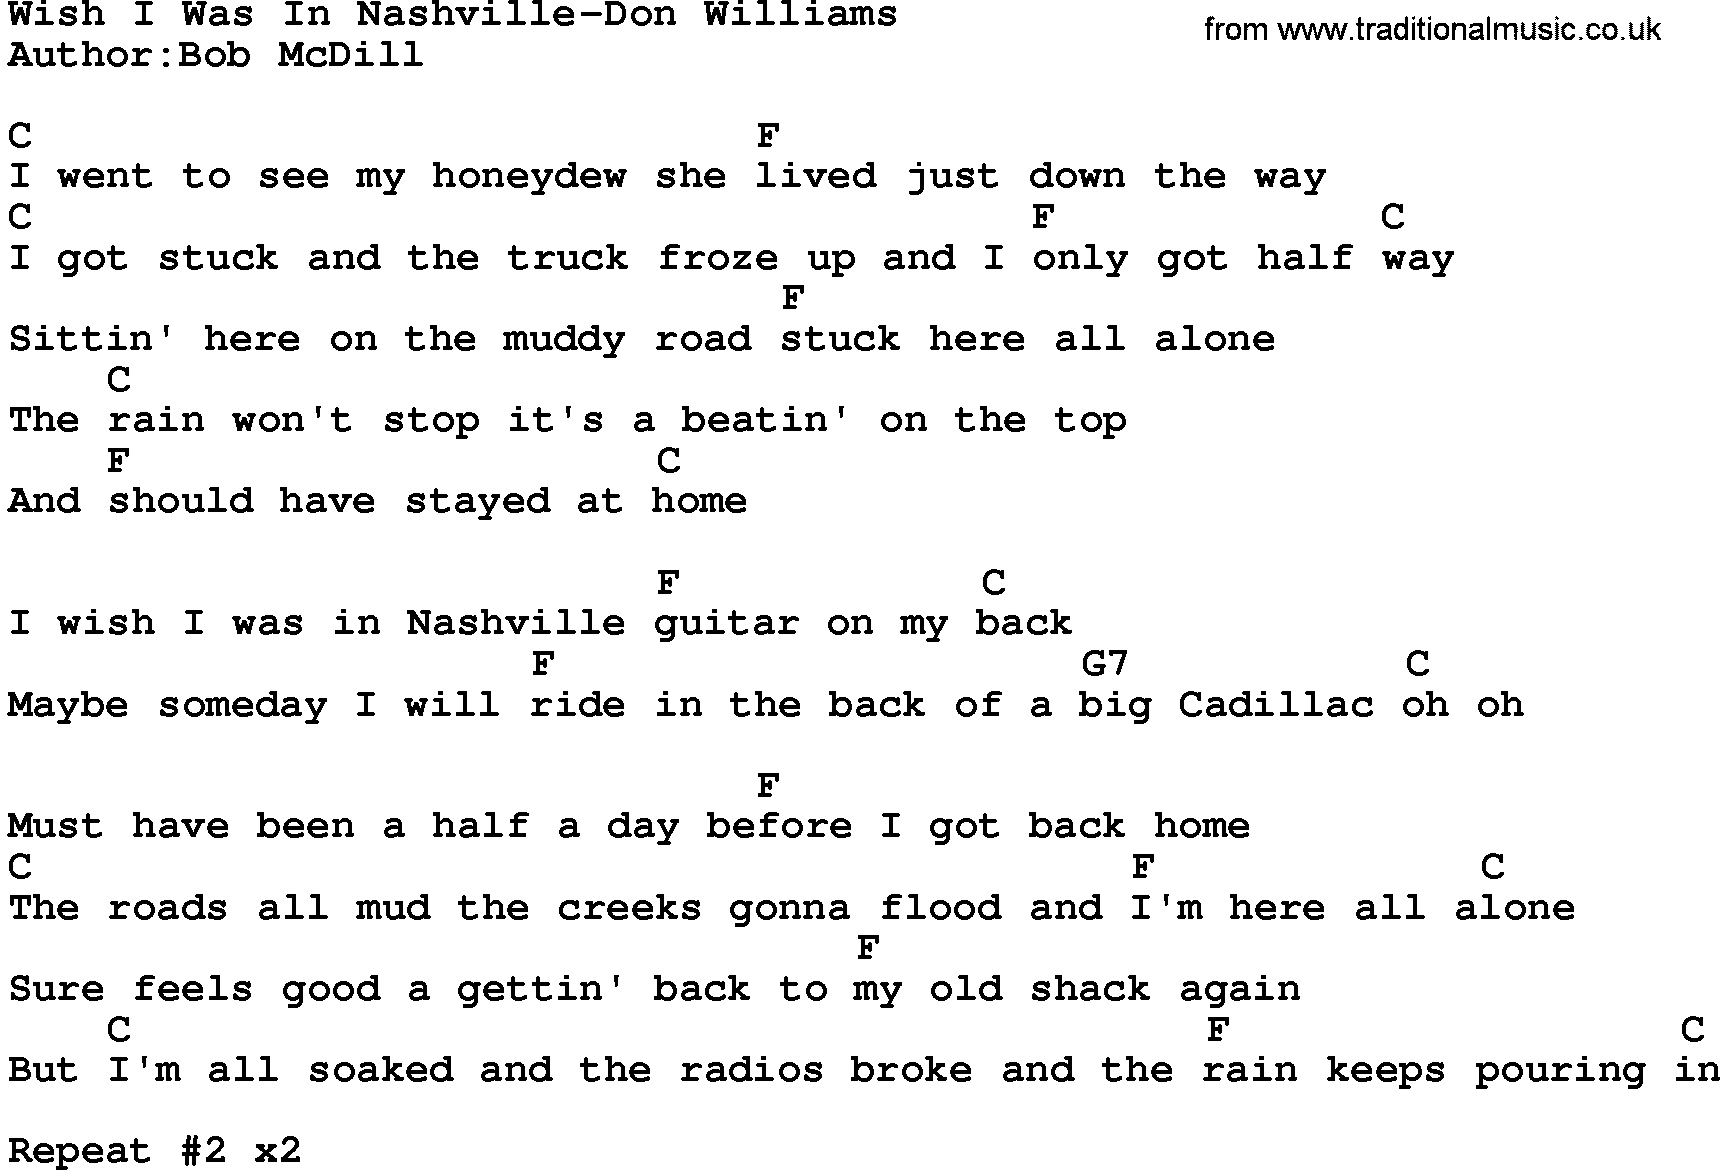 Country music song: Wish I Was In Nashville-Don Williams lyrics and chords